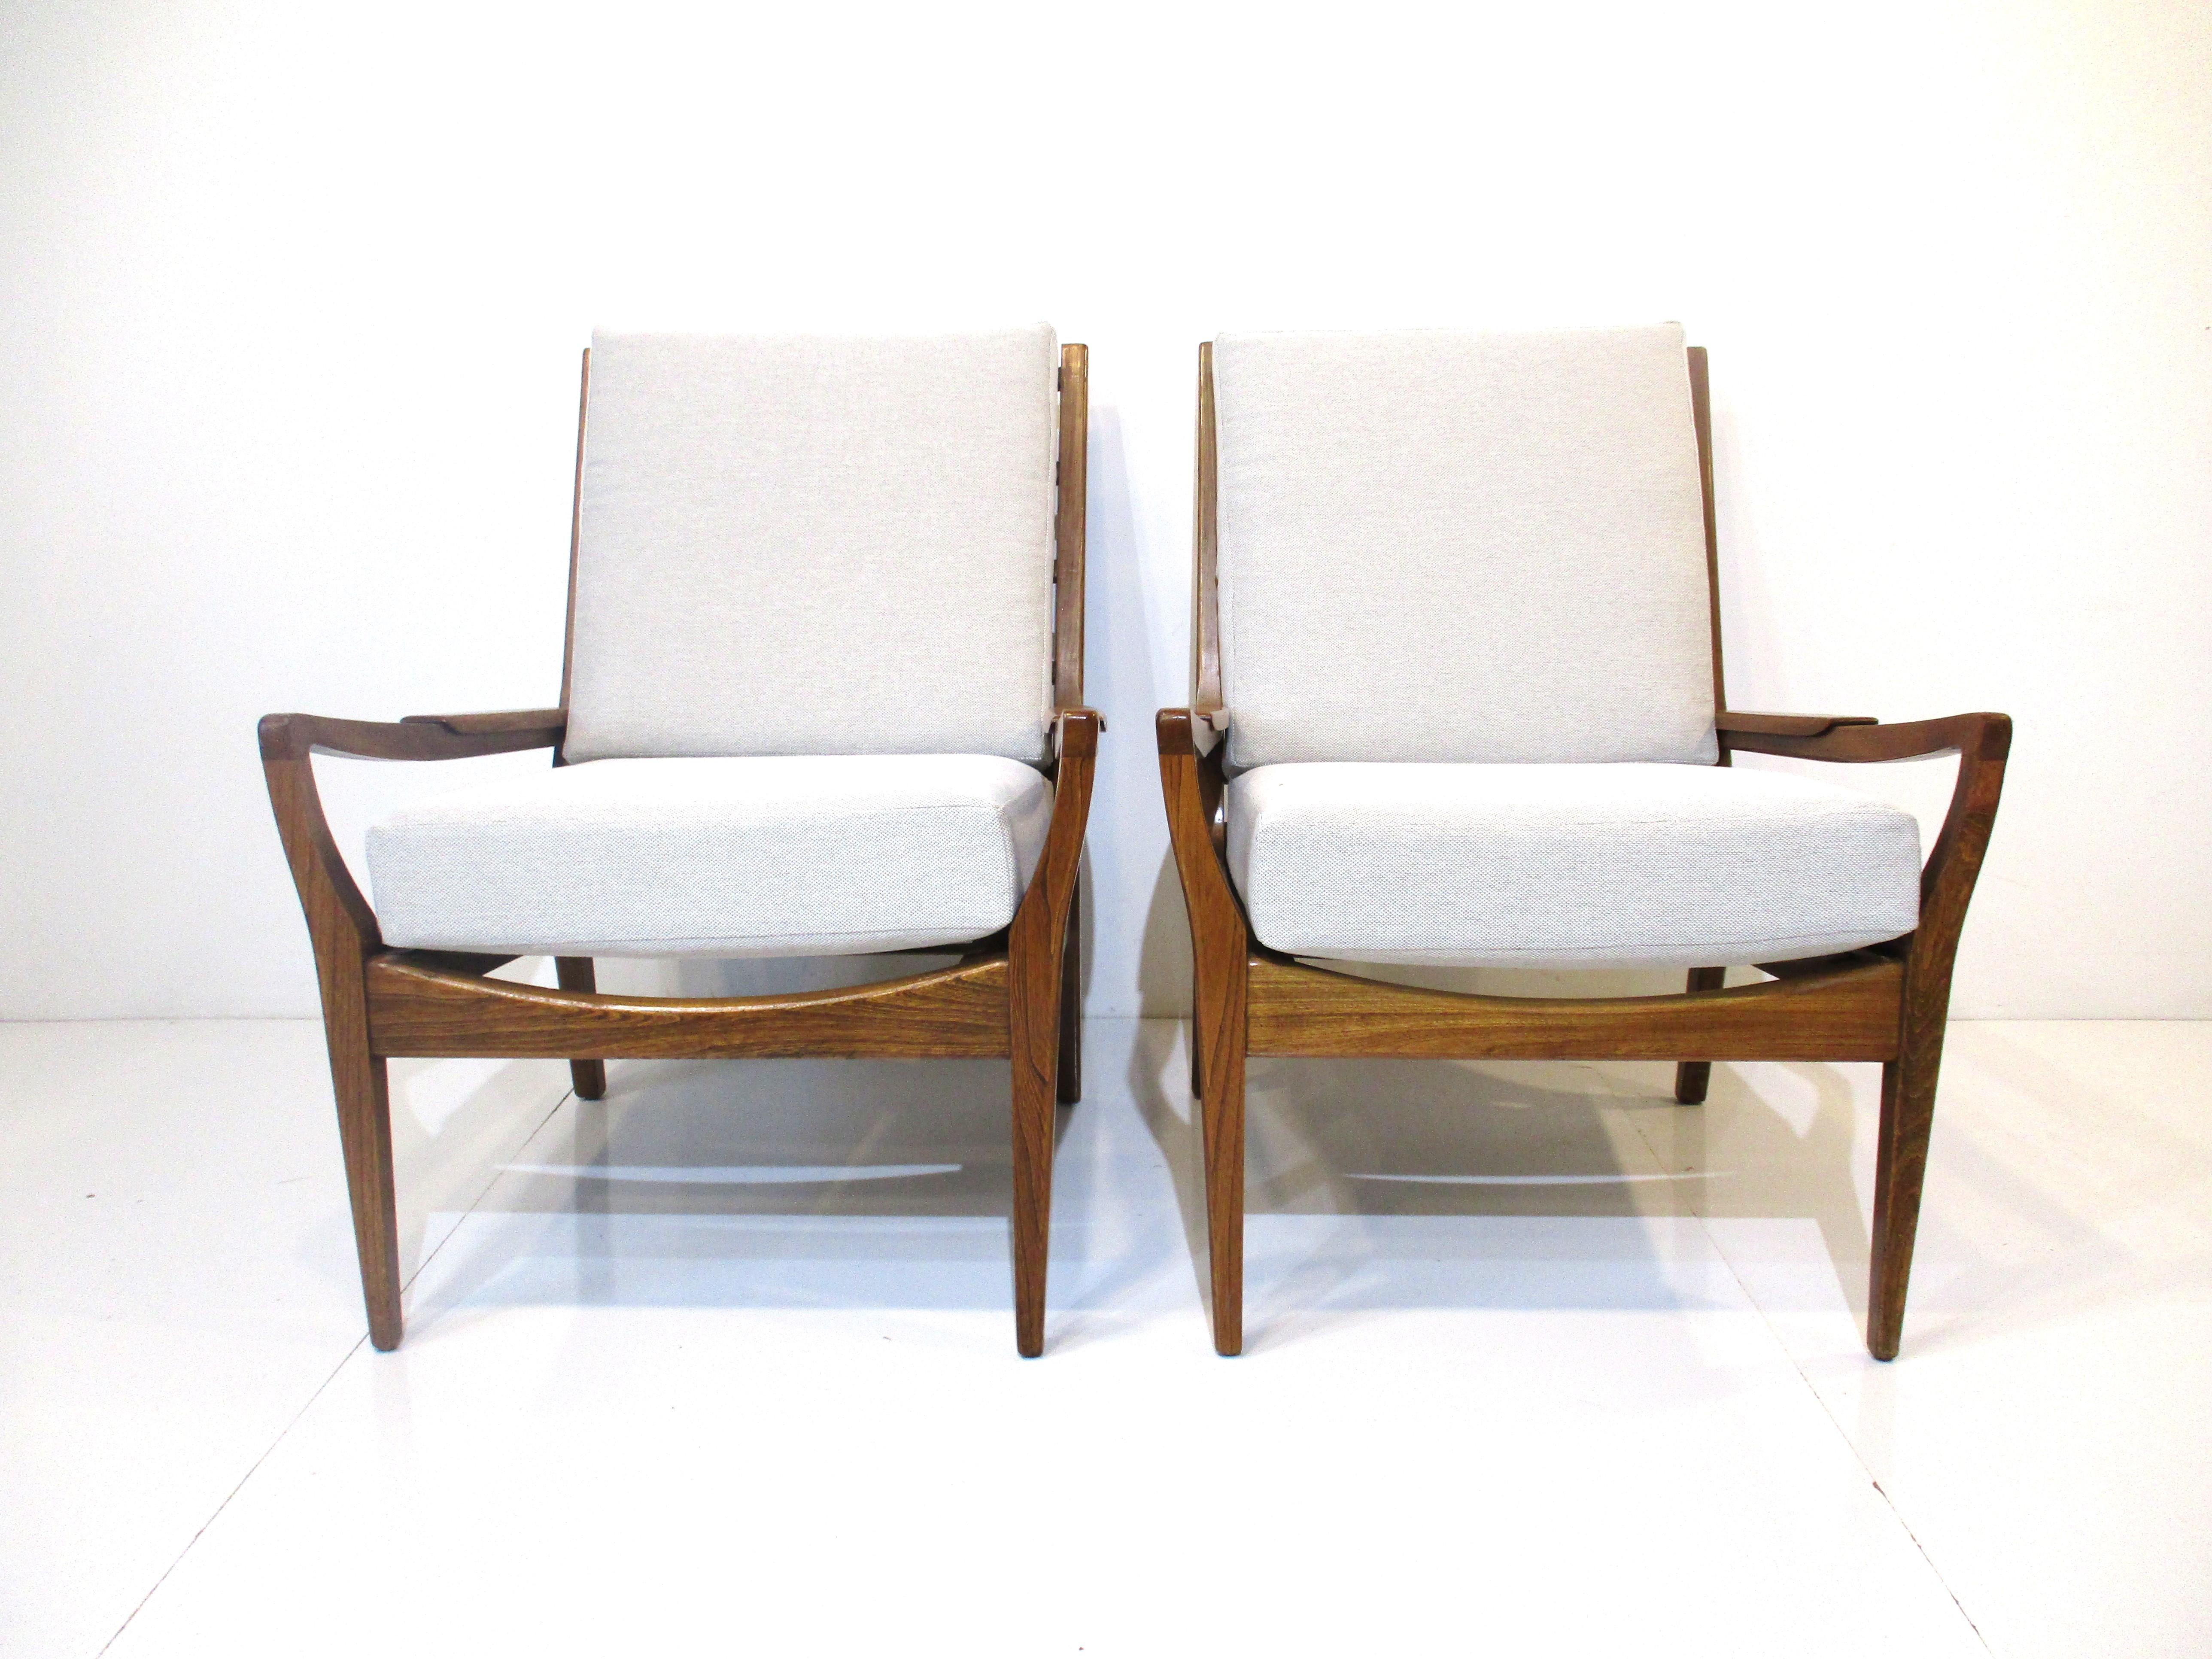 A pair of very well crafted and sturdy wood framed lounge chairs each with two loose upholstered cushions in a woven taupe and cream contract fabric. Designed having a laid back profile and small matching wood arm pads for comfort and wood slat